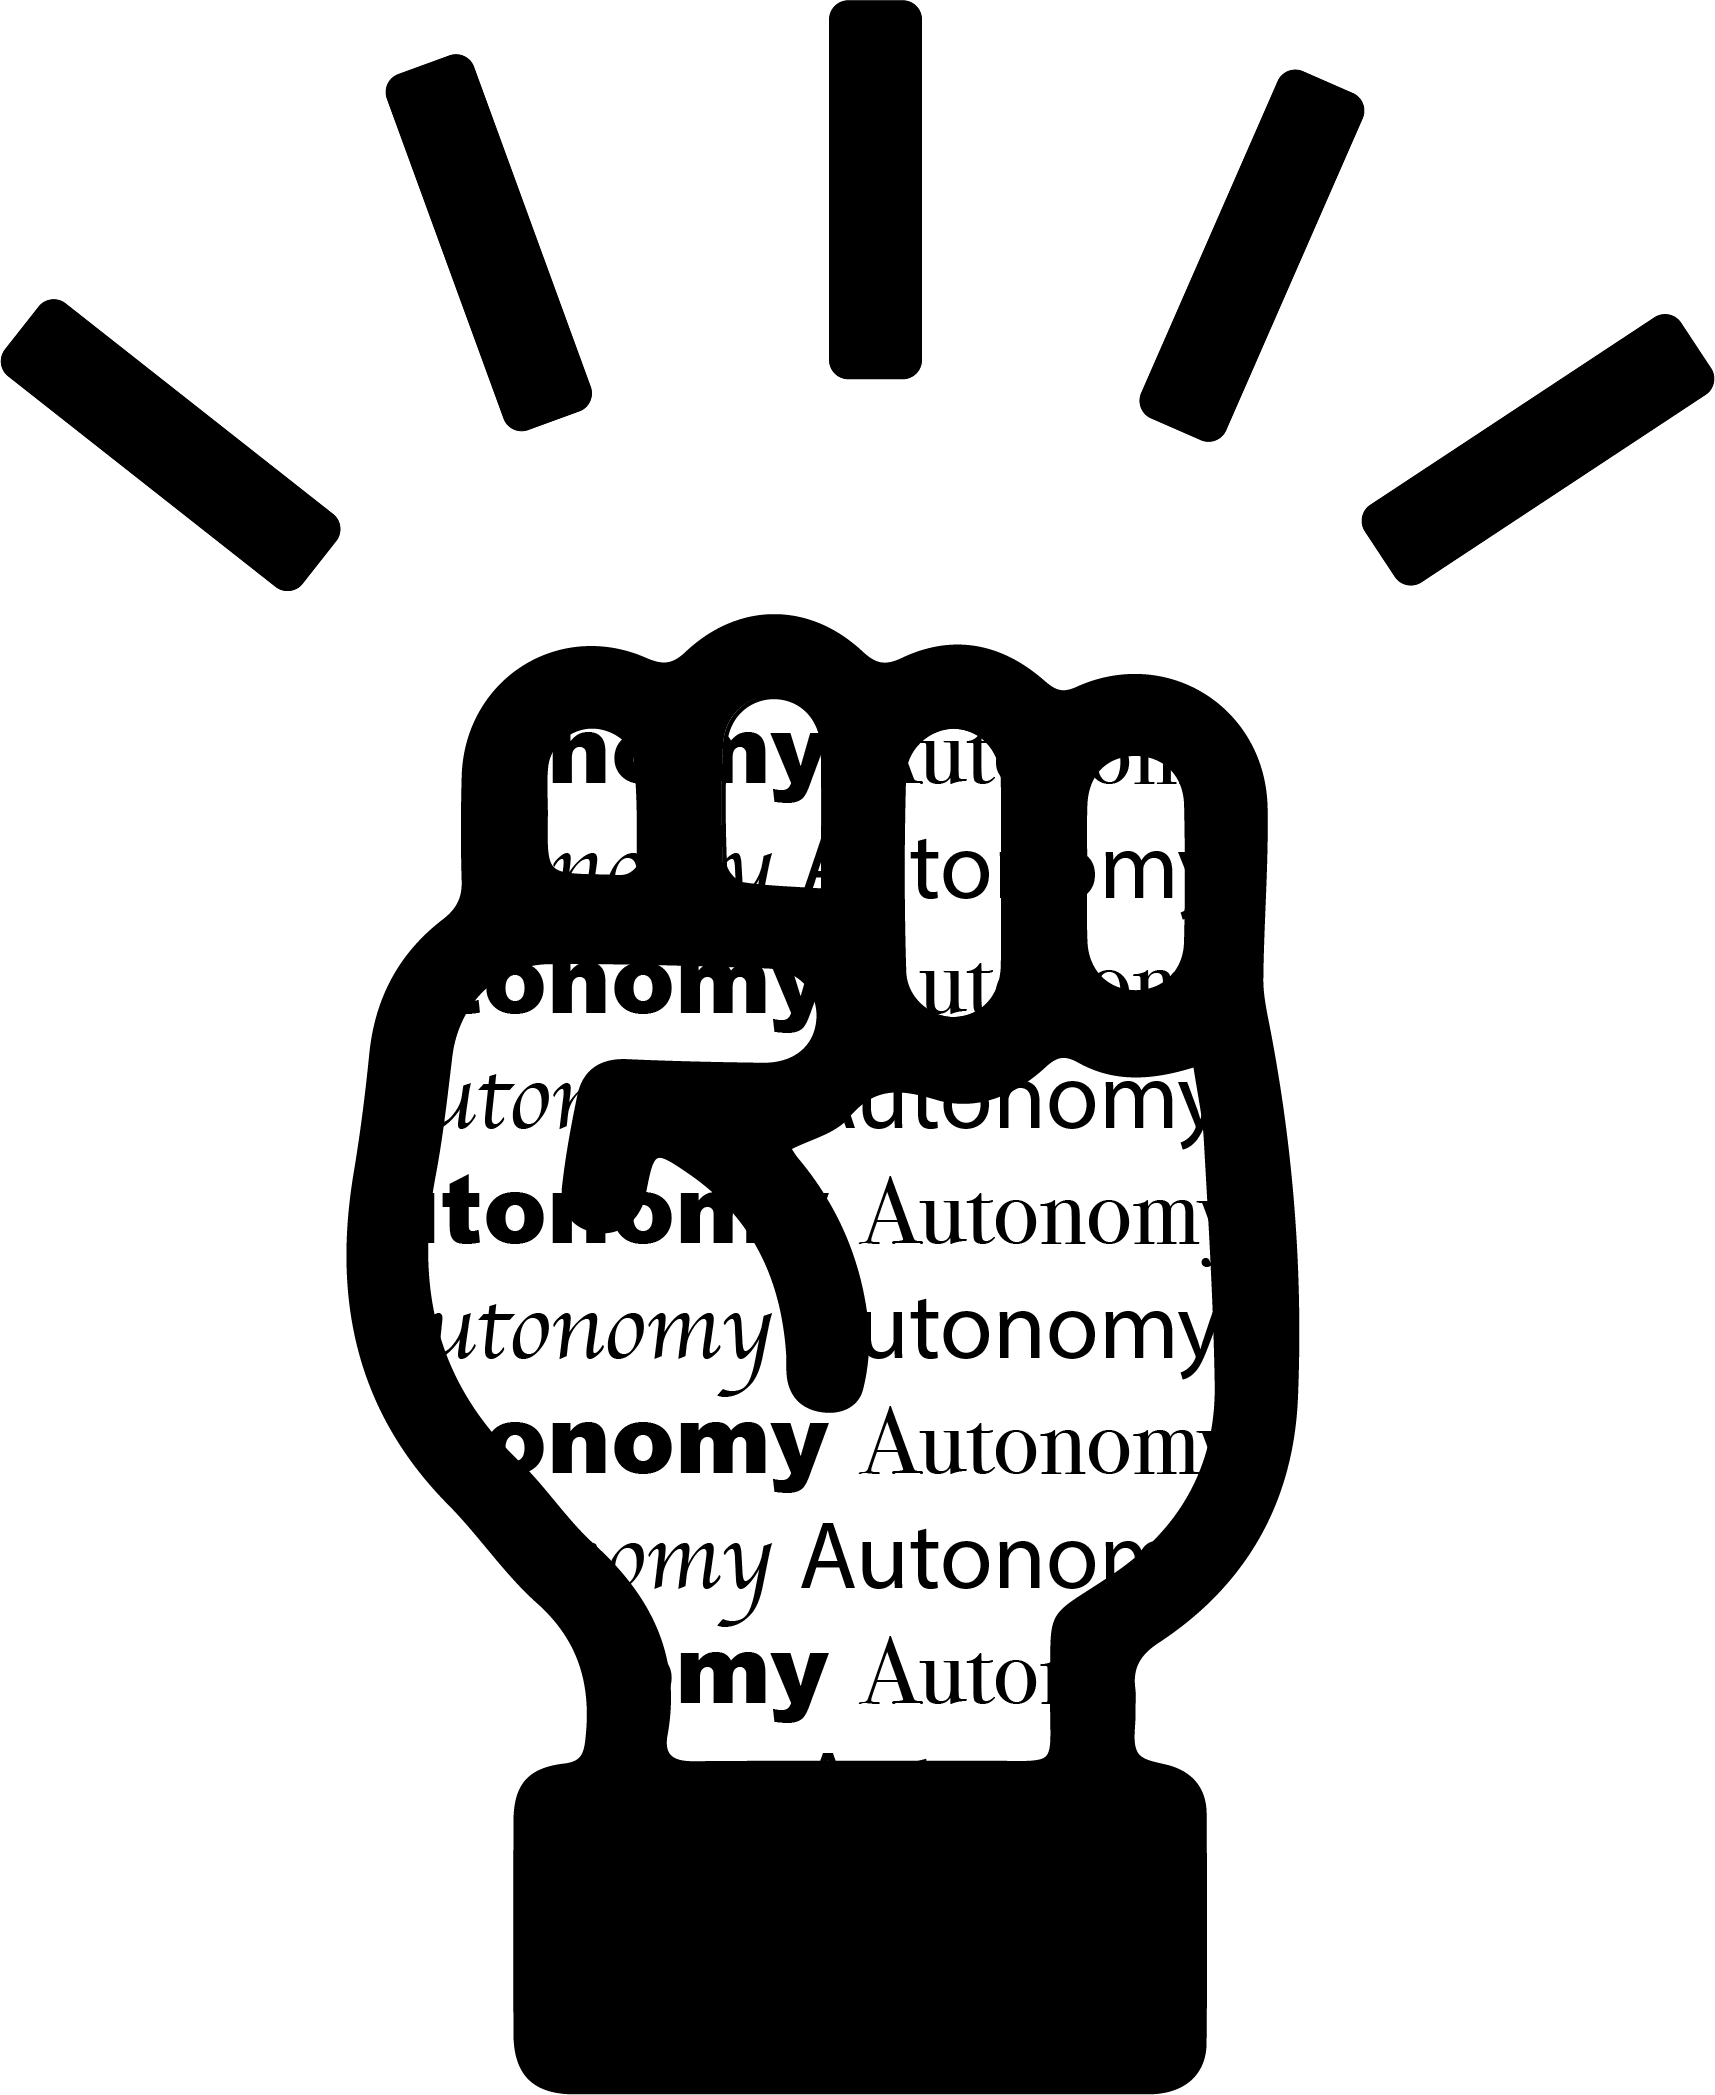 Image of fist icon with repeating text on the inside fist shape